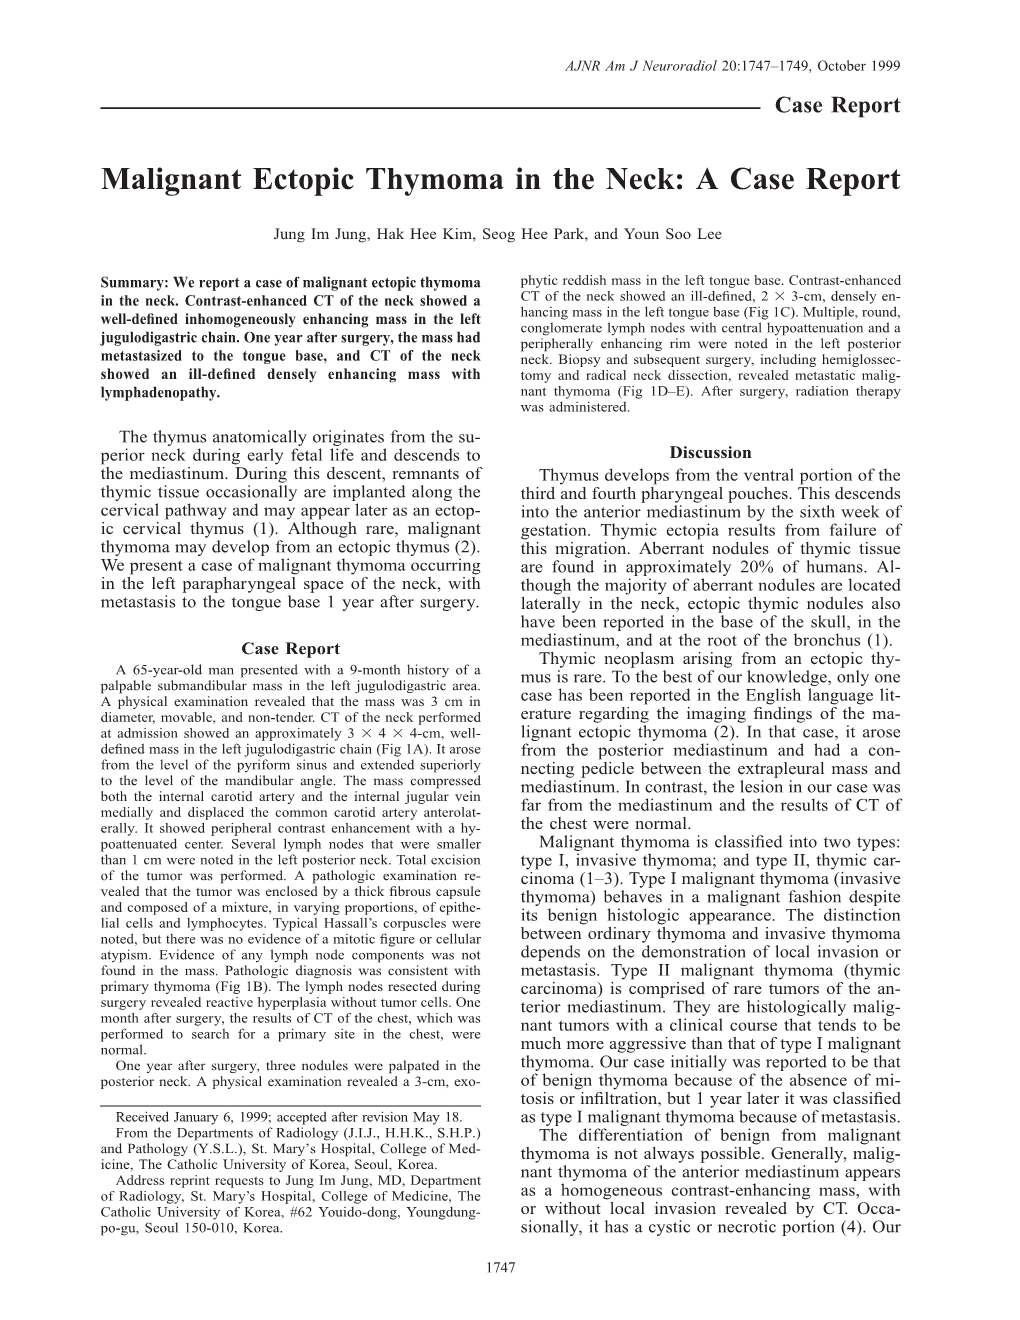 Malignant Ectopic Thymoma in the Neck: a Case Report